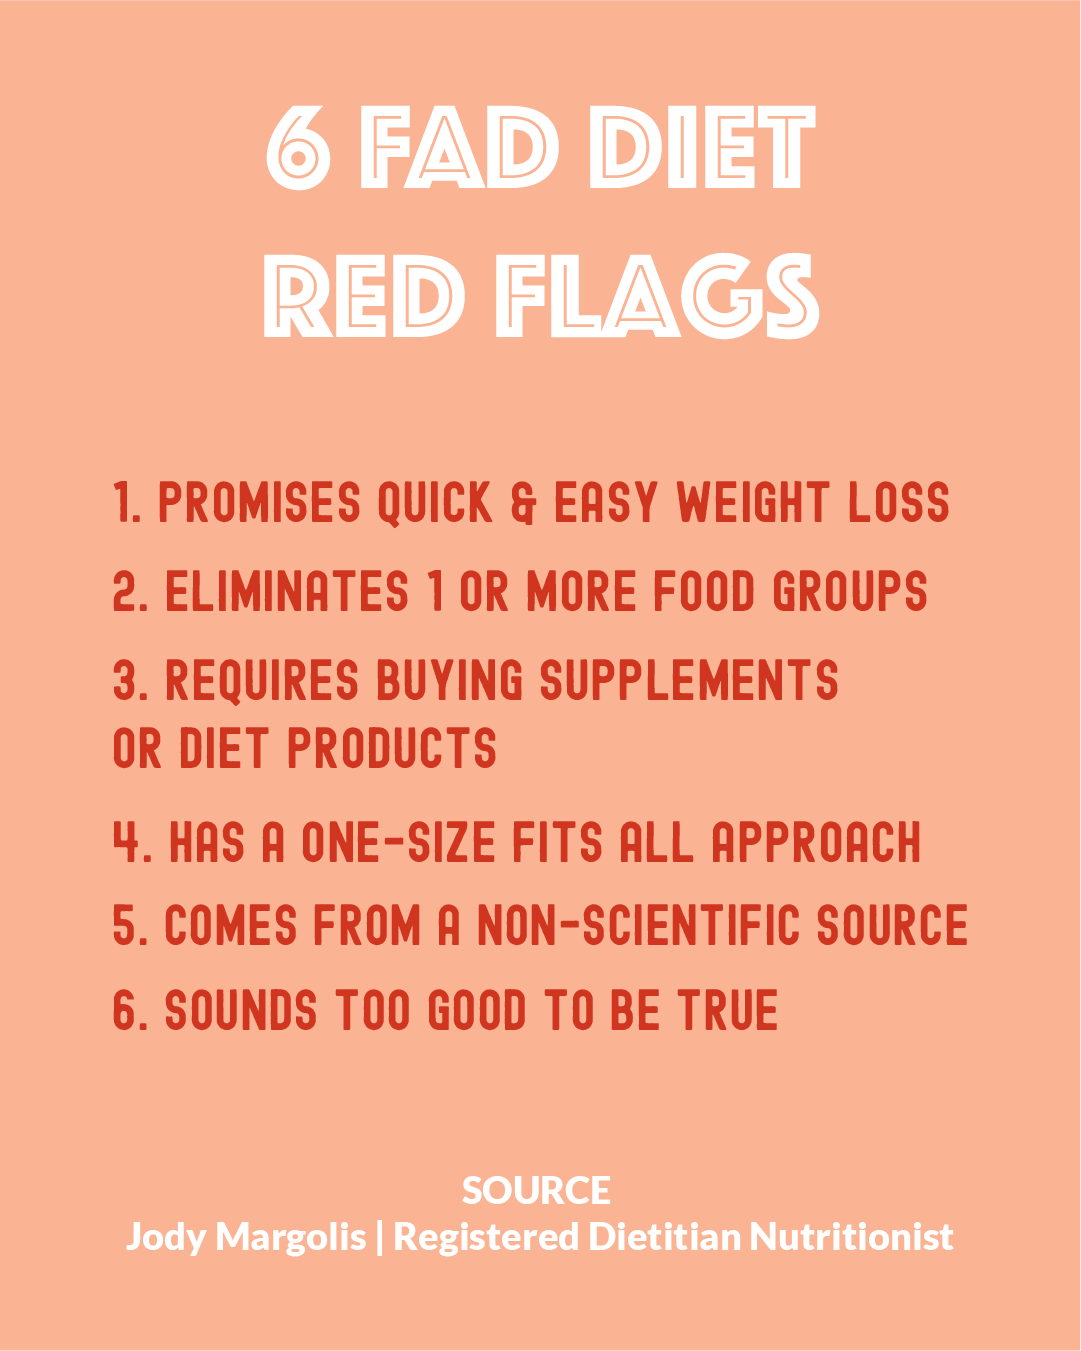 6 fad diet red flags